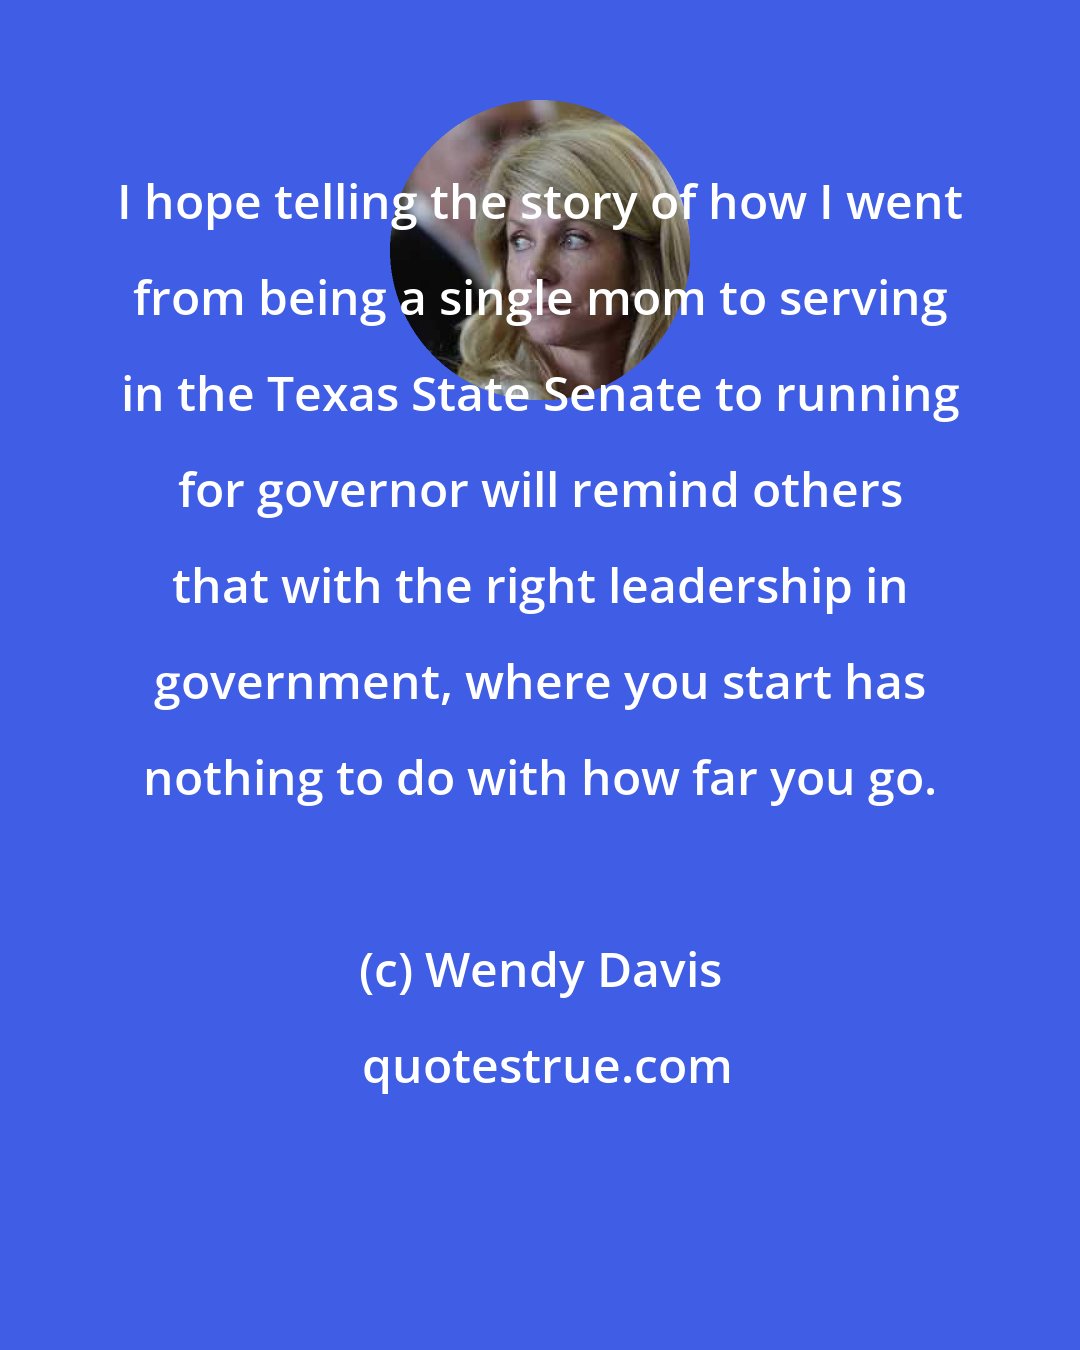 Wendy Davis: I hope telling the story of how I went from being a single mom to serving in the Texas State Senate to running for governor will remind others that with the right leadership in government, where you start has nothing to do with how far you go.